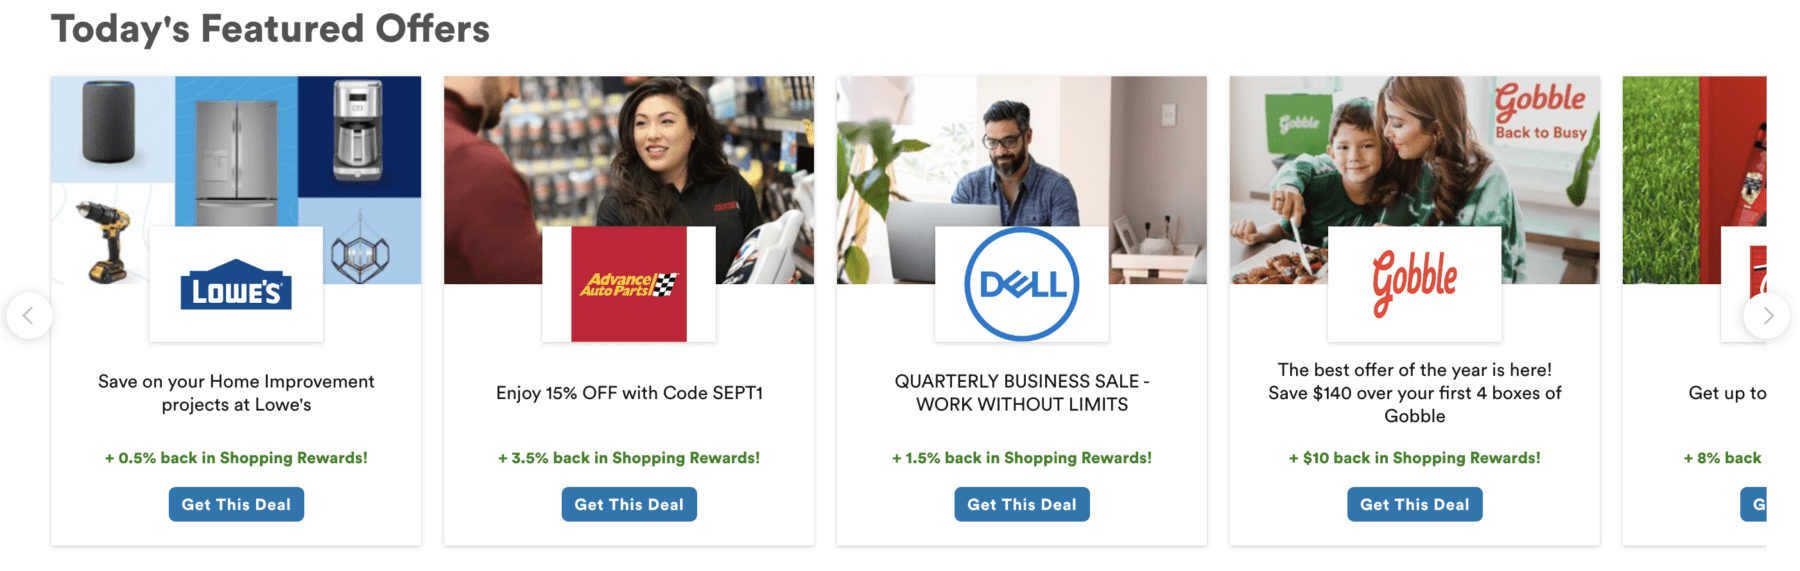 Capital One Shopping Featured Offers